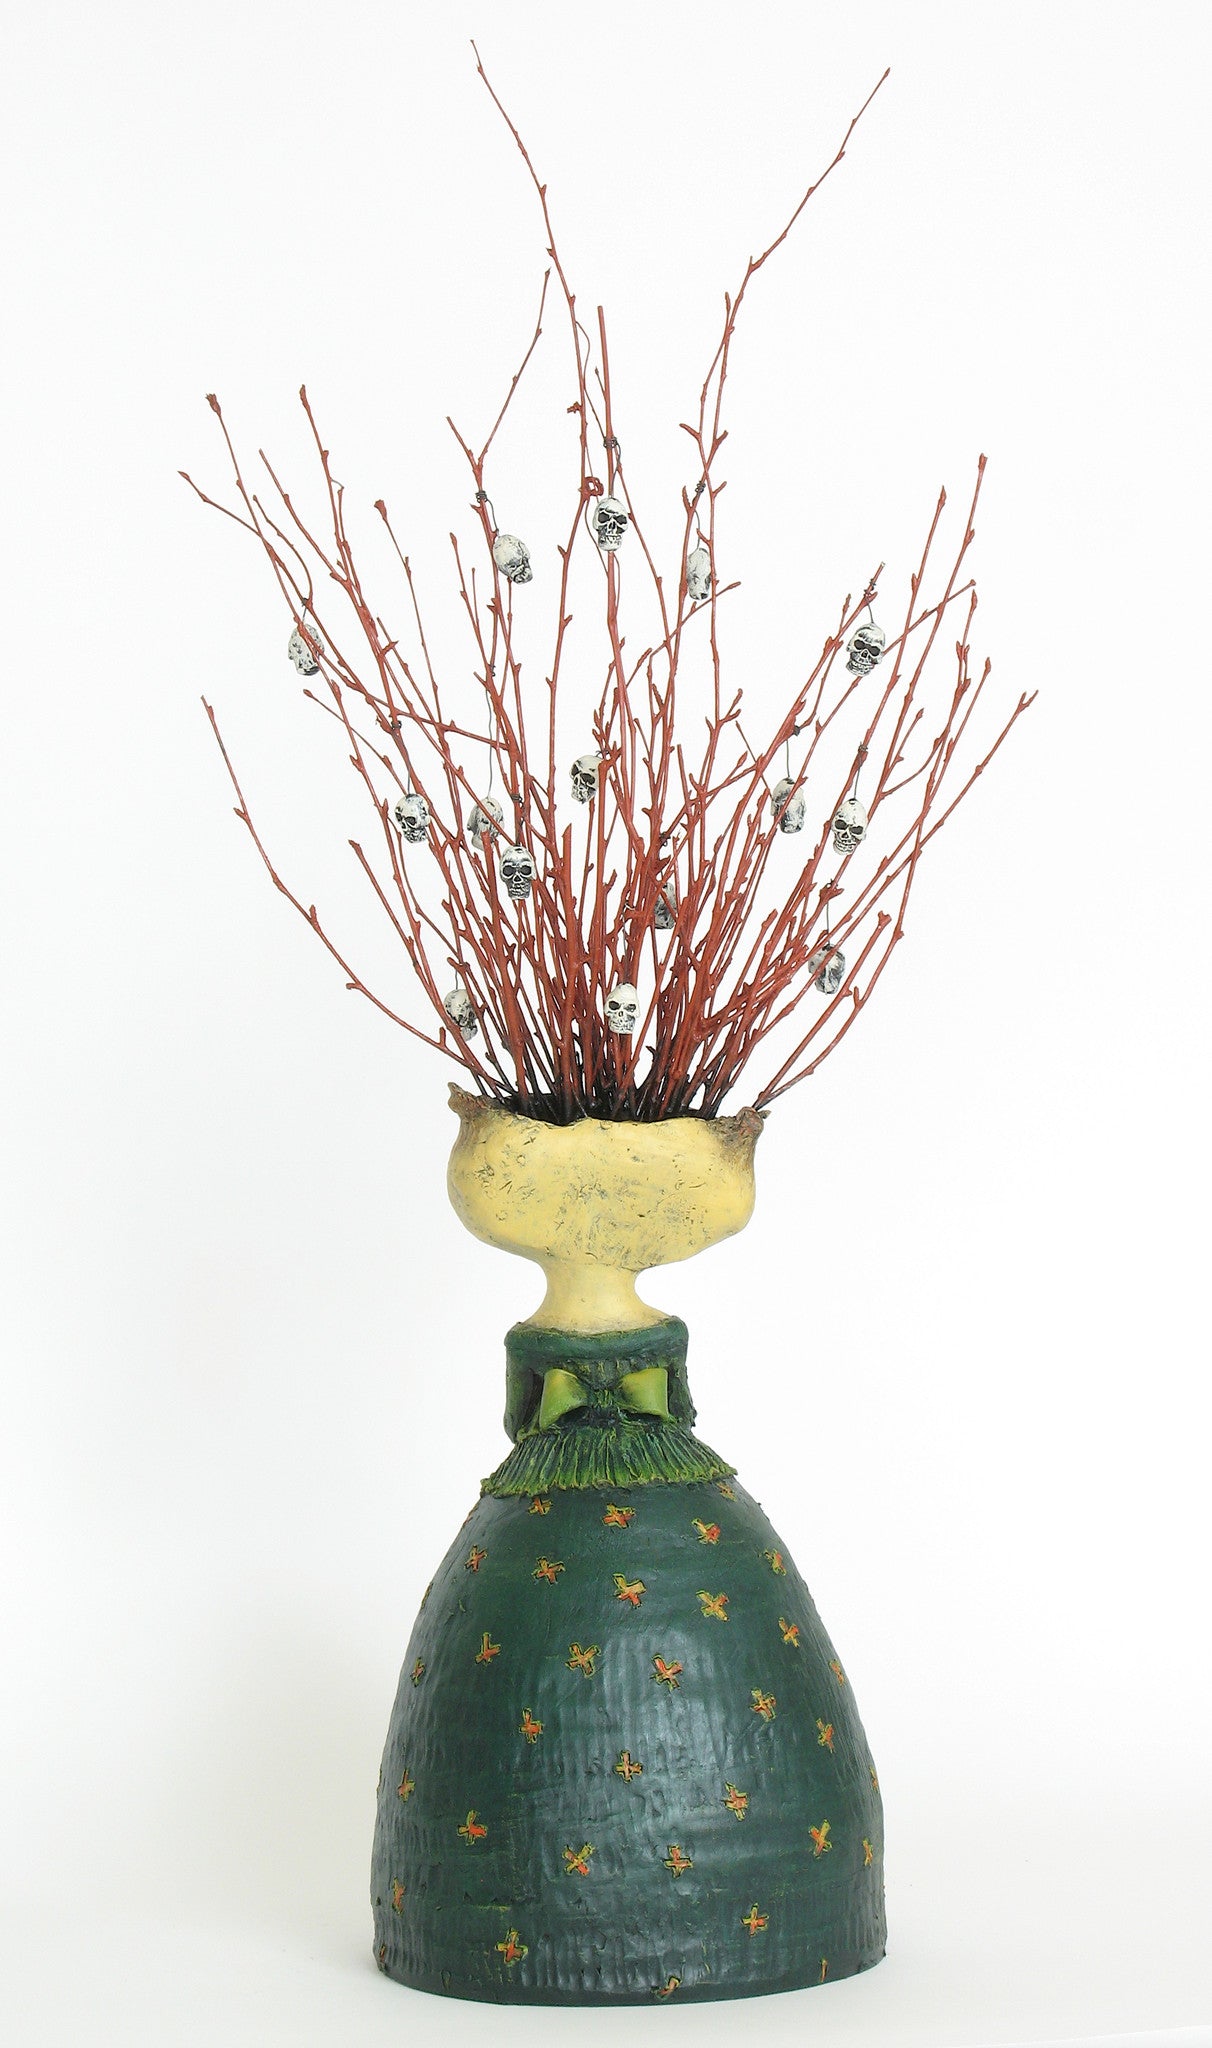 SOLD - Amy   "She Found that Some of Her Friends Were an Acquired Taste"  original ceramic sculpture by Jacquline Hurlbert